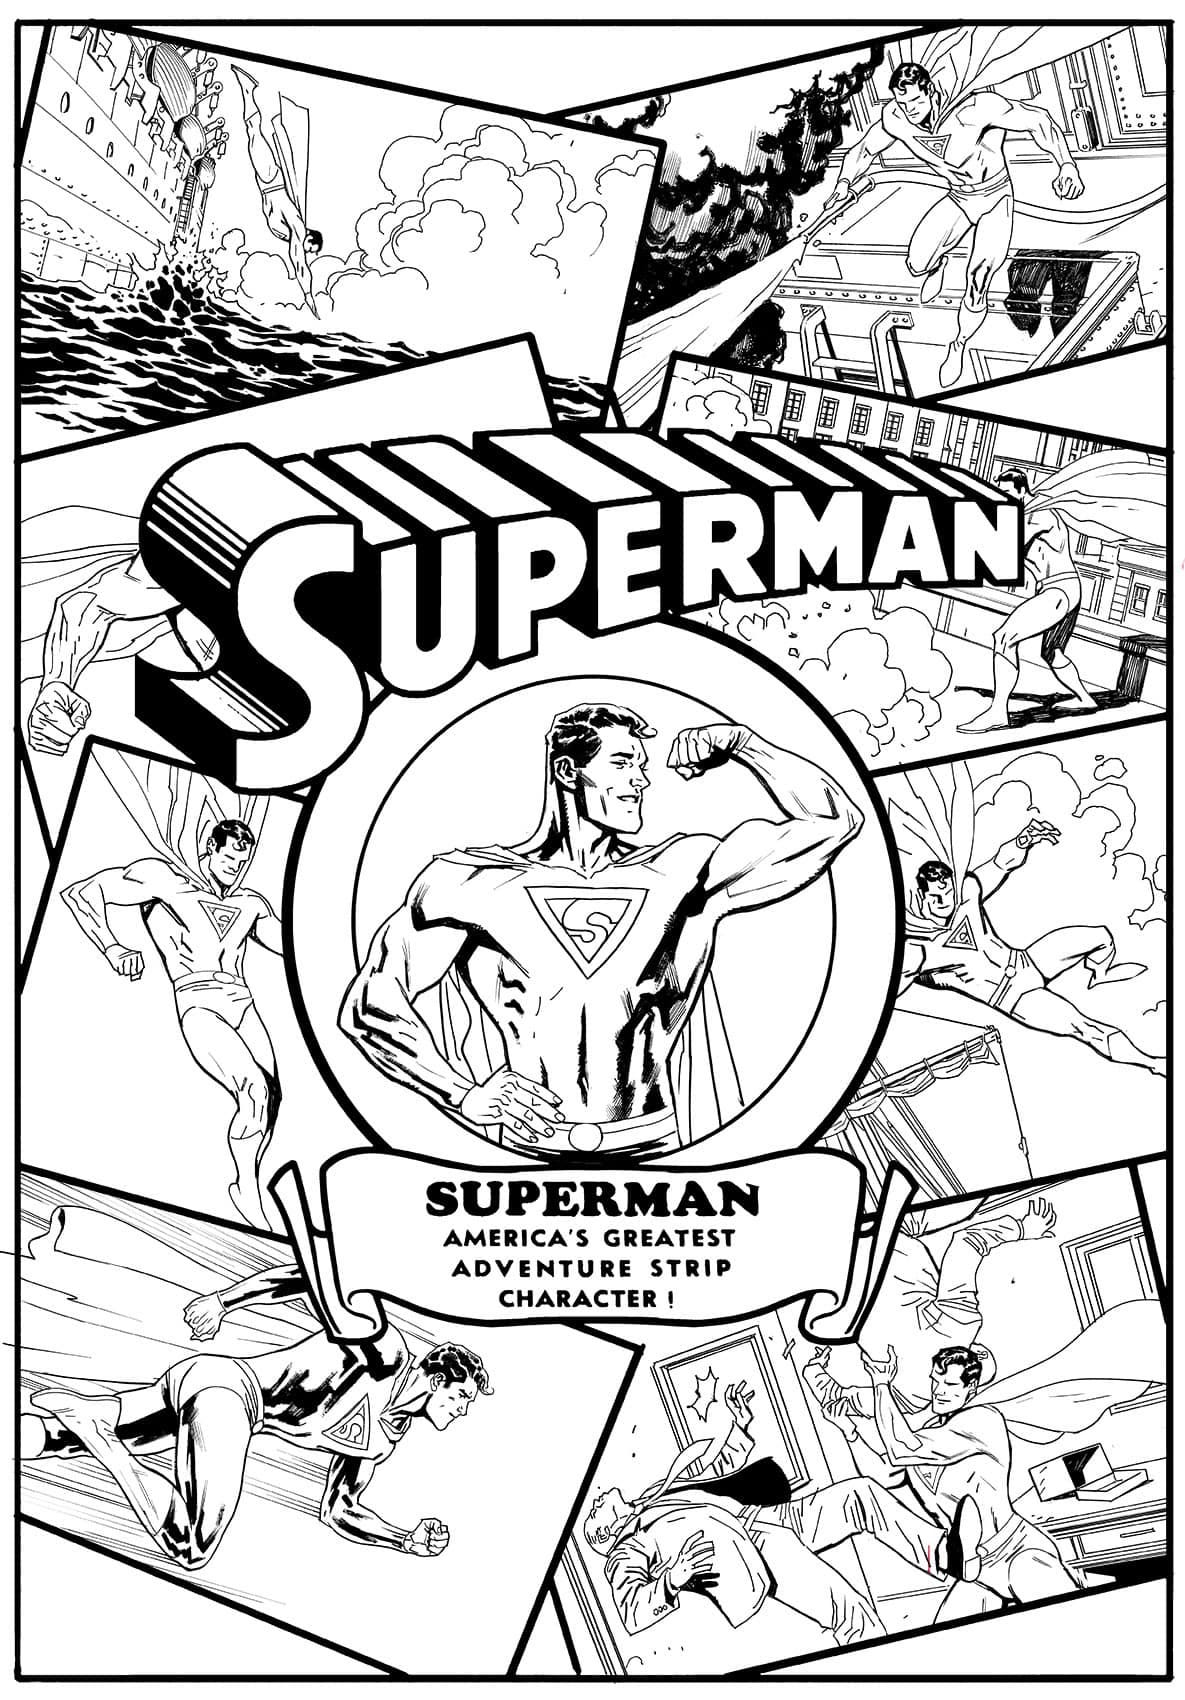 May be an illustration of Superman and text that says 'SUPERMAN SUPE RMAN SUPERMAN AMERICA'S GREATEST ADVENTURE STRIP CHARACTER!'